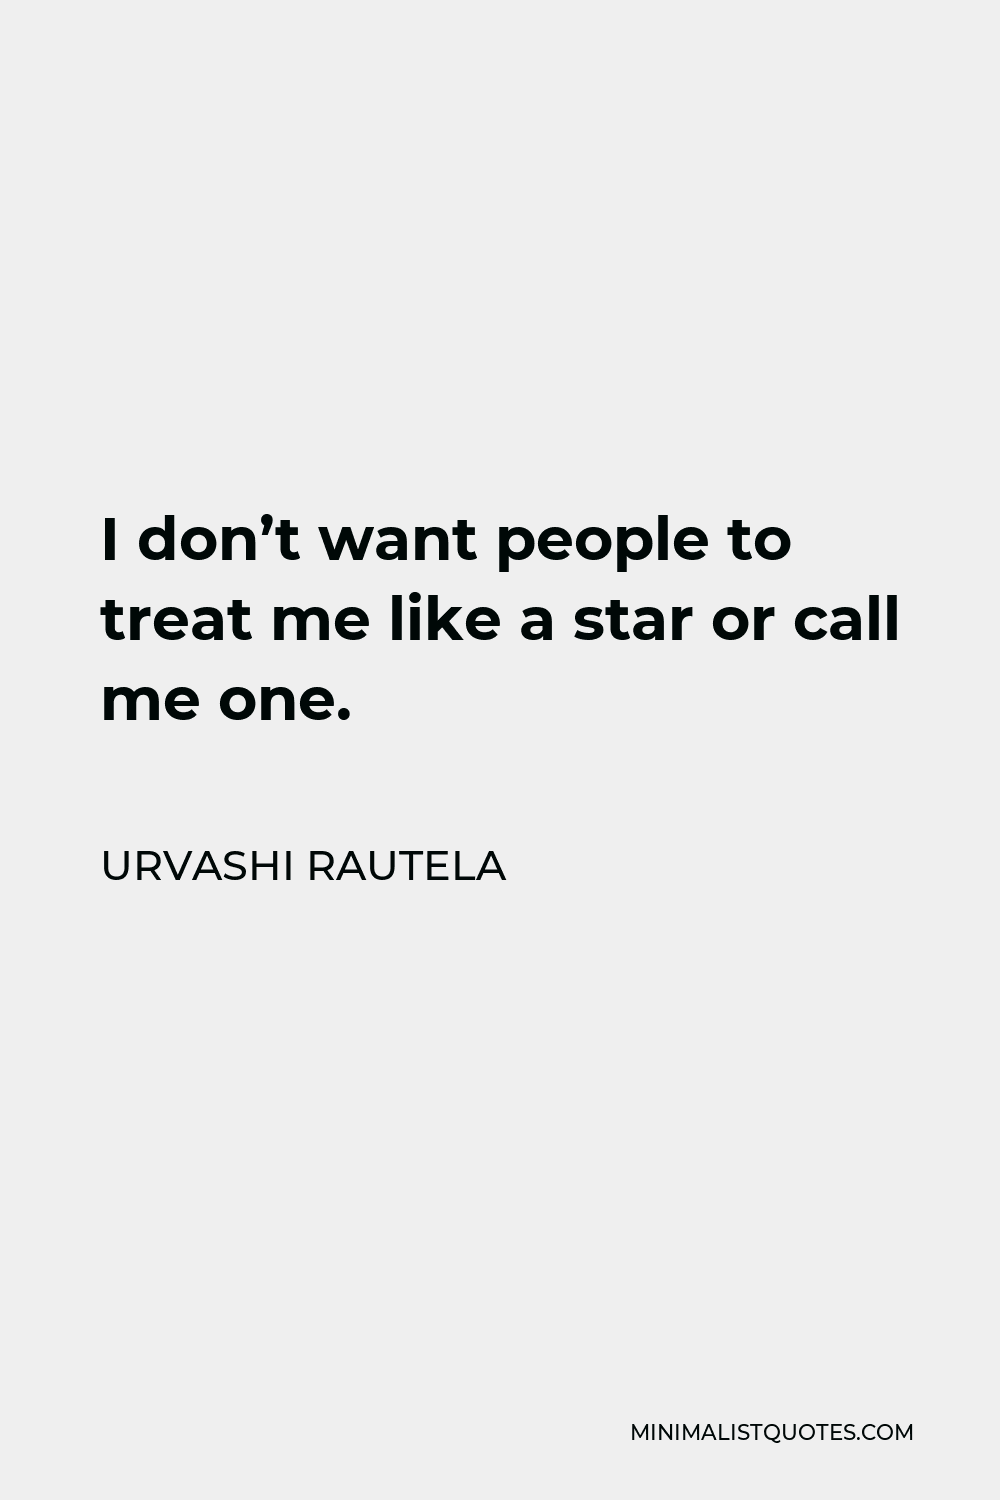 Urvashi Rautela Quote - I don’t want people to treat me like a star or call me one.